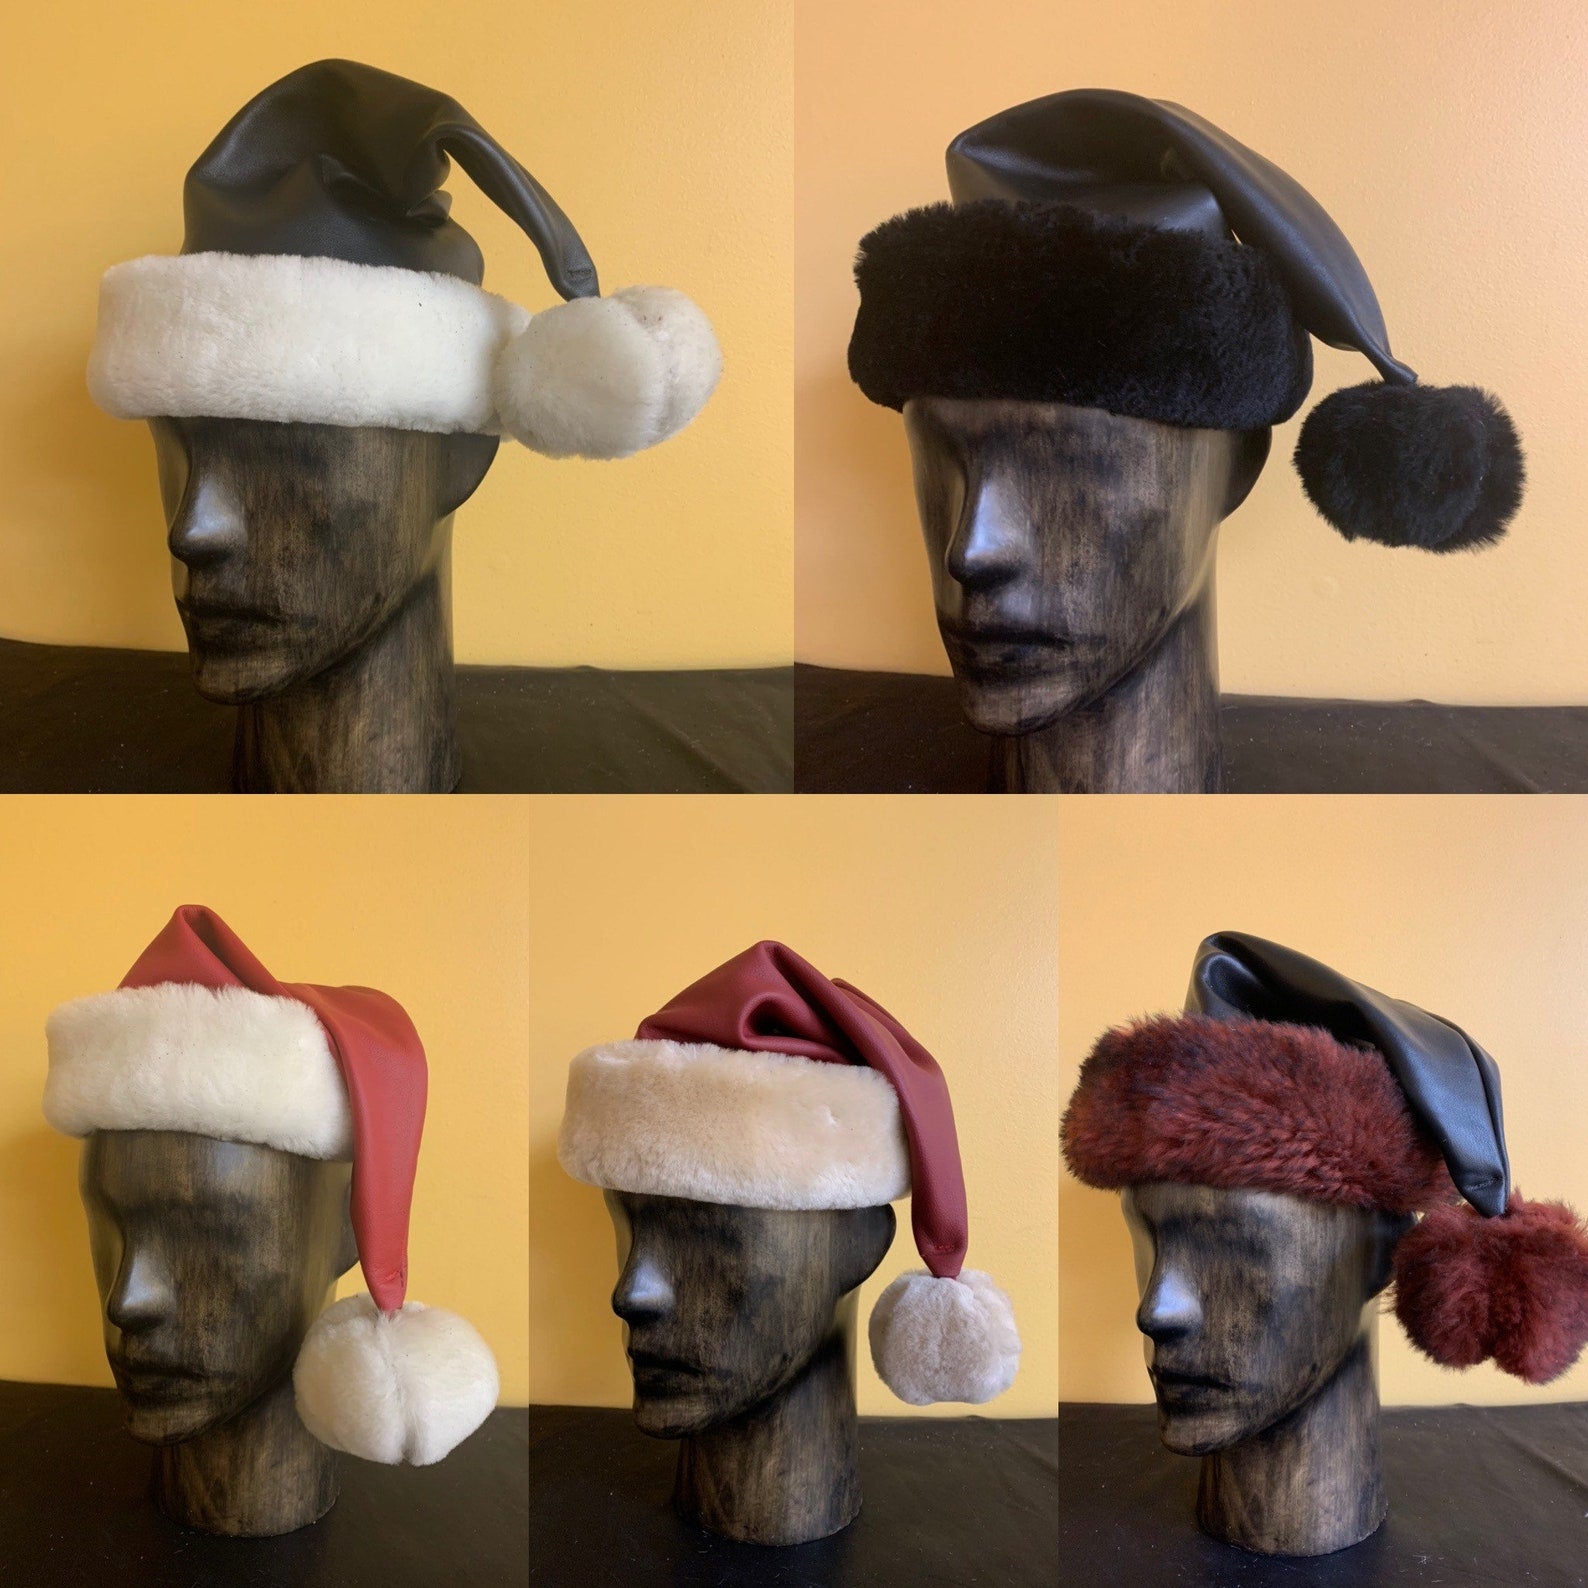 A composition showing the different color combinations of Leather Santa Elf Hats.